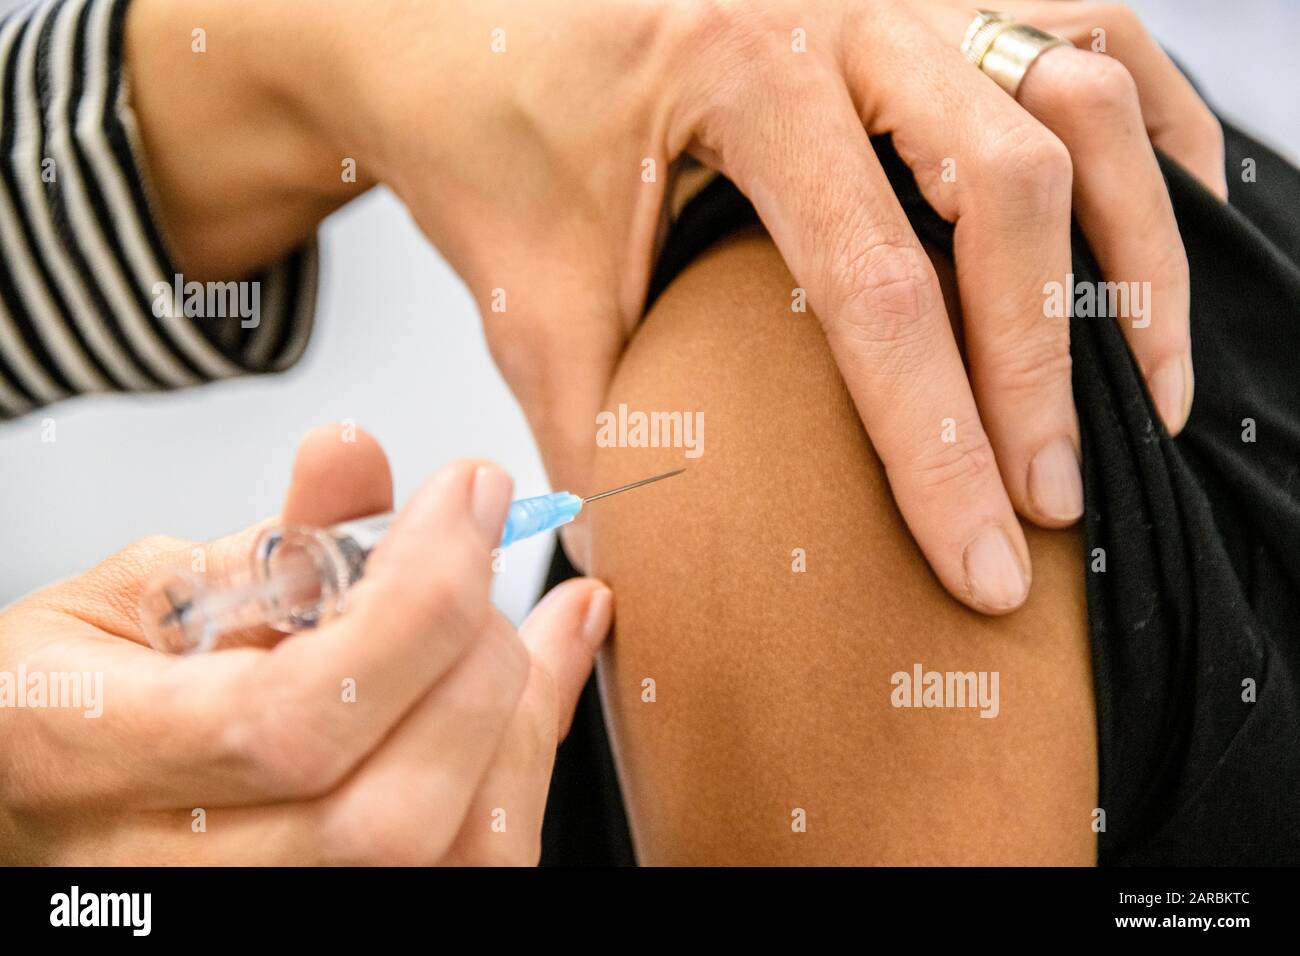 vaccination injection Stock Photo